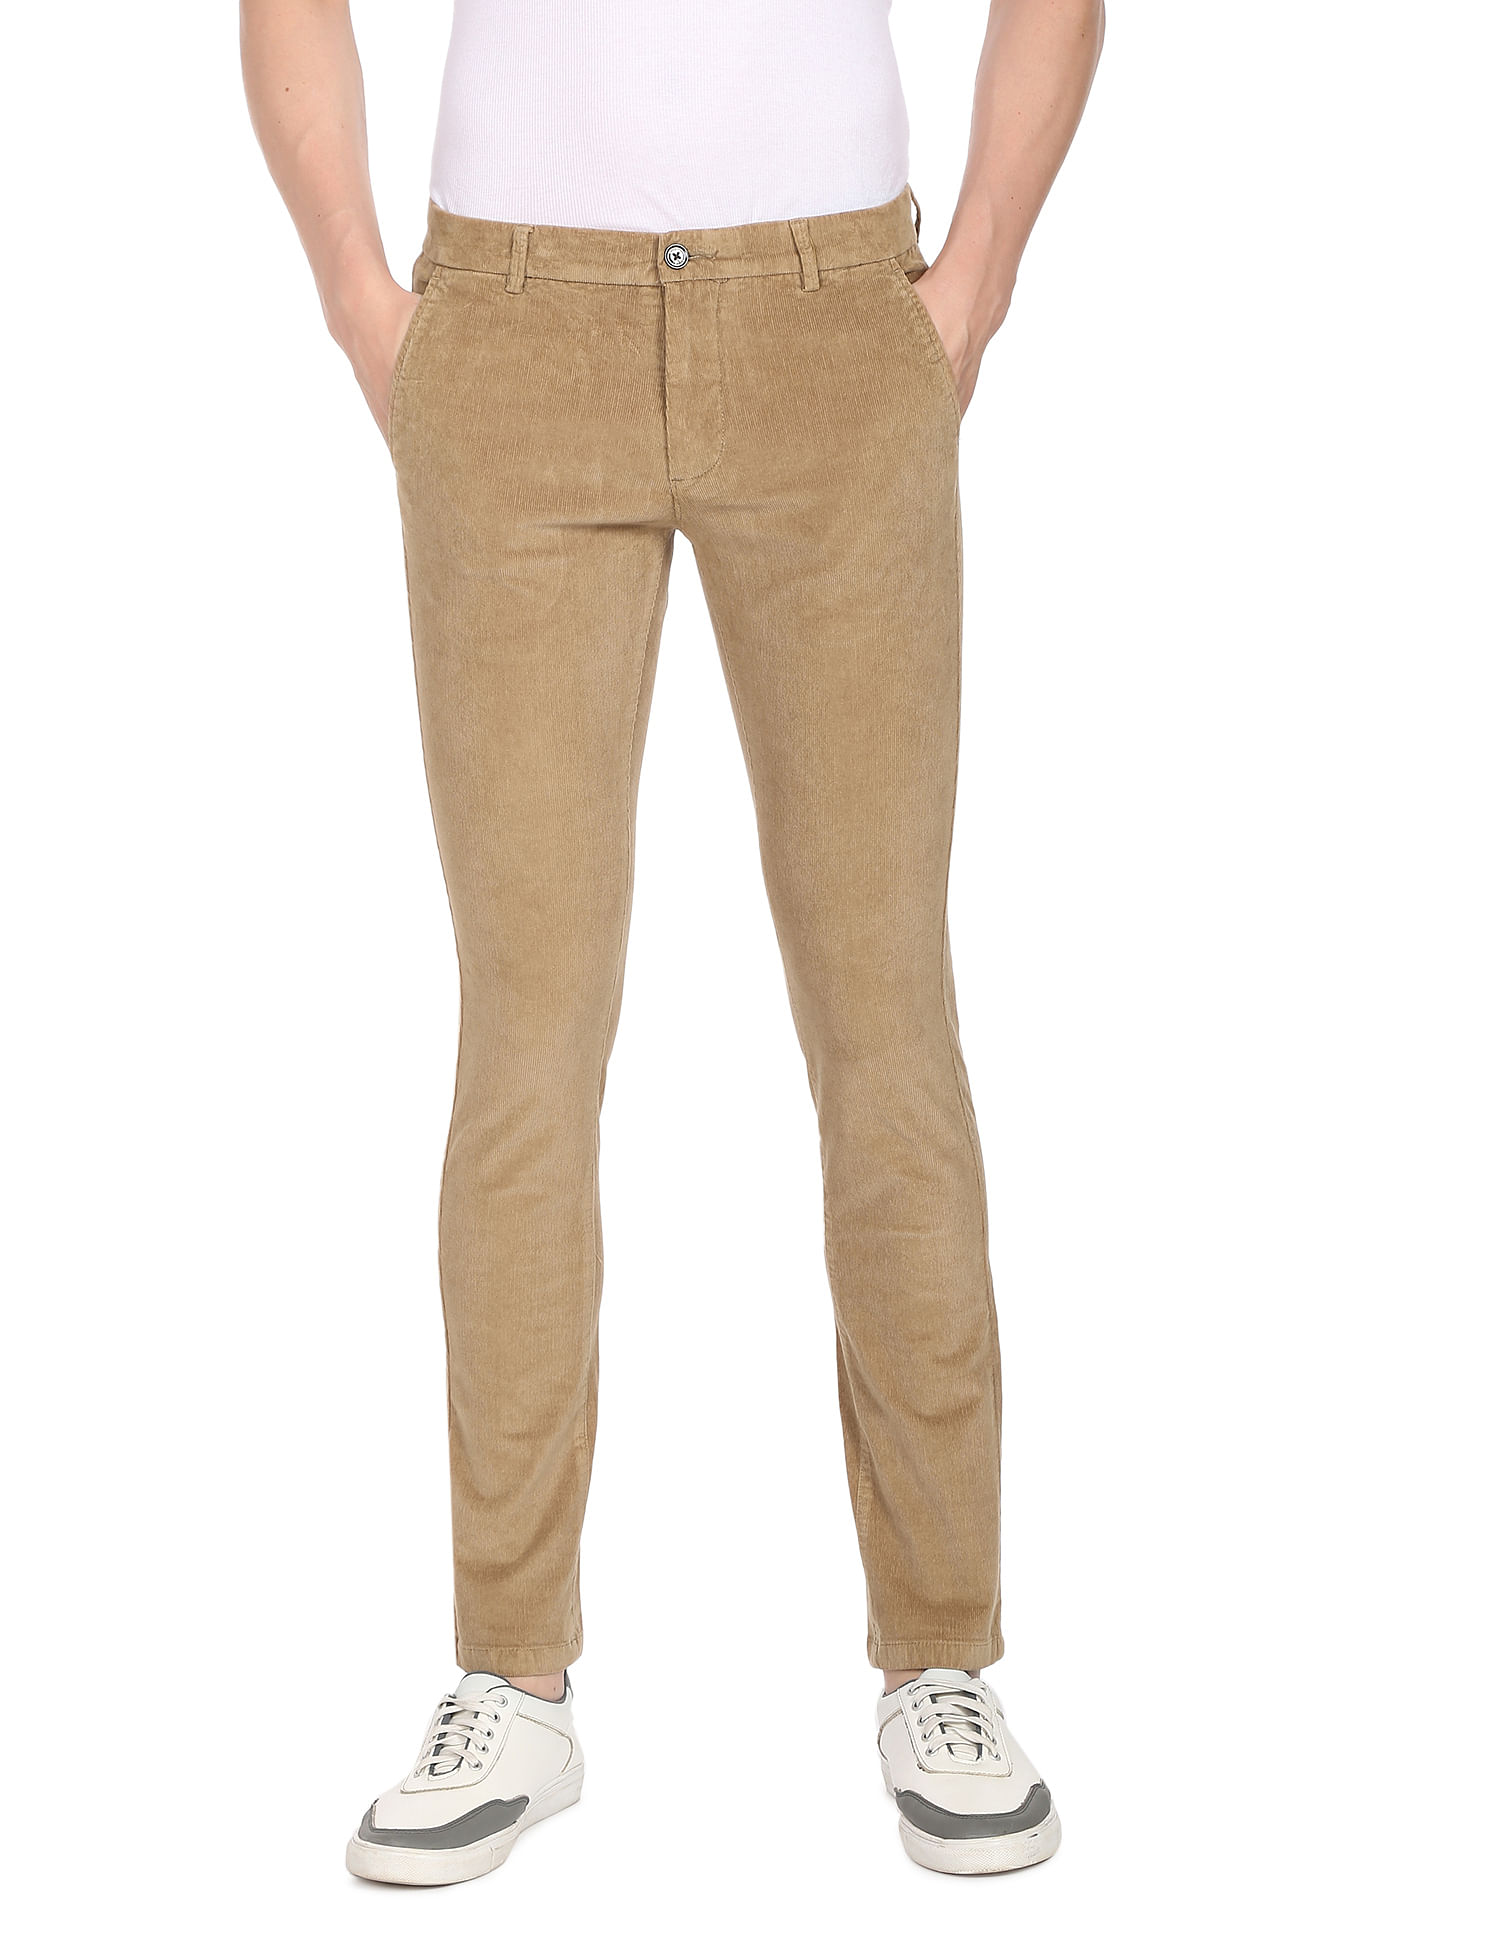 Peter England Casual Trousers  Buy Peter England Men Olive Textured Super Slim  Fit Casual Trousers Online  Nykaa Fashion